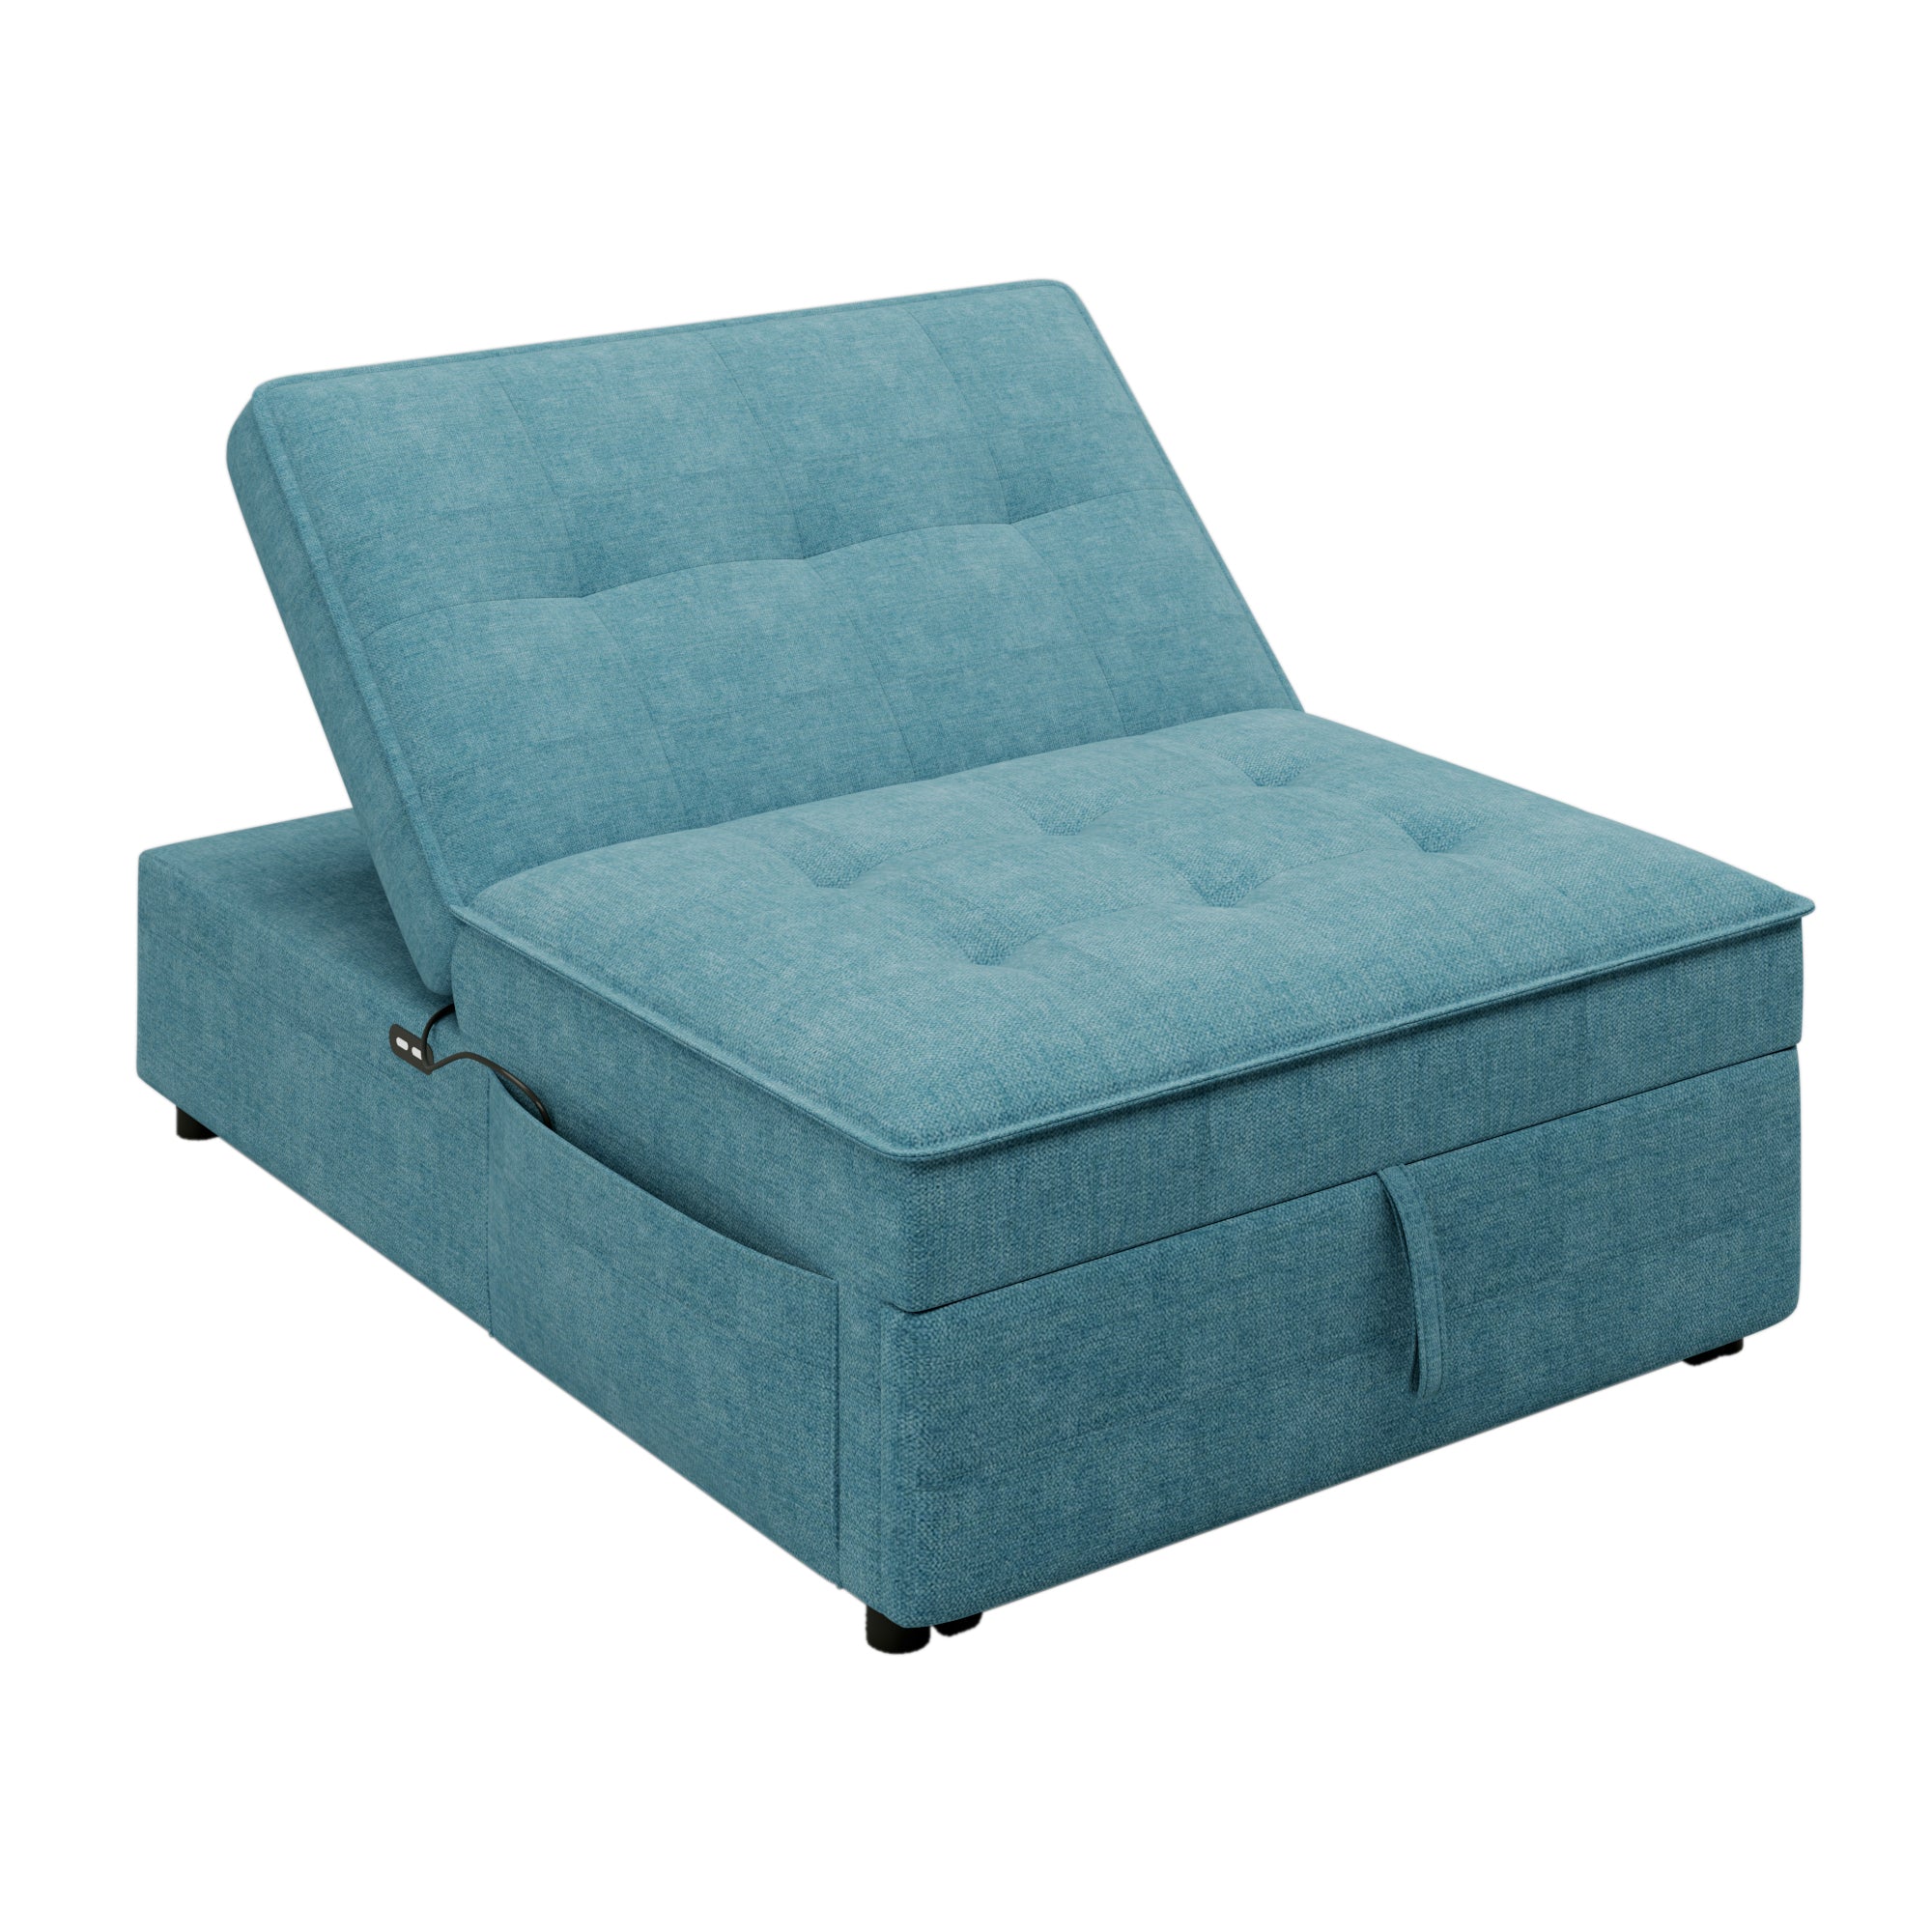 4 in 1 Sofa Bed, Chair Bed, Multi Function Folding teal-primary living space-linen